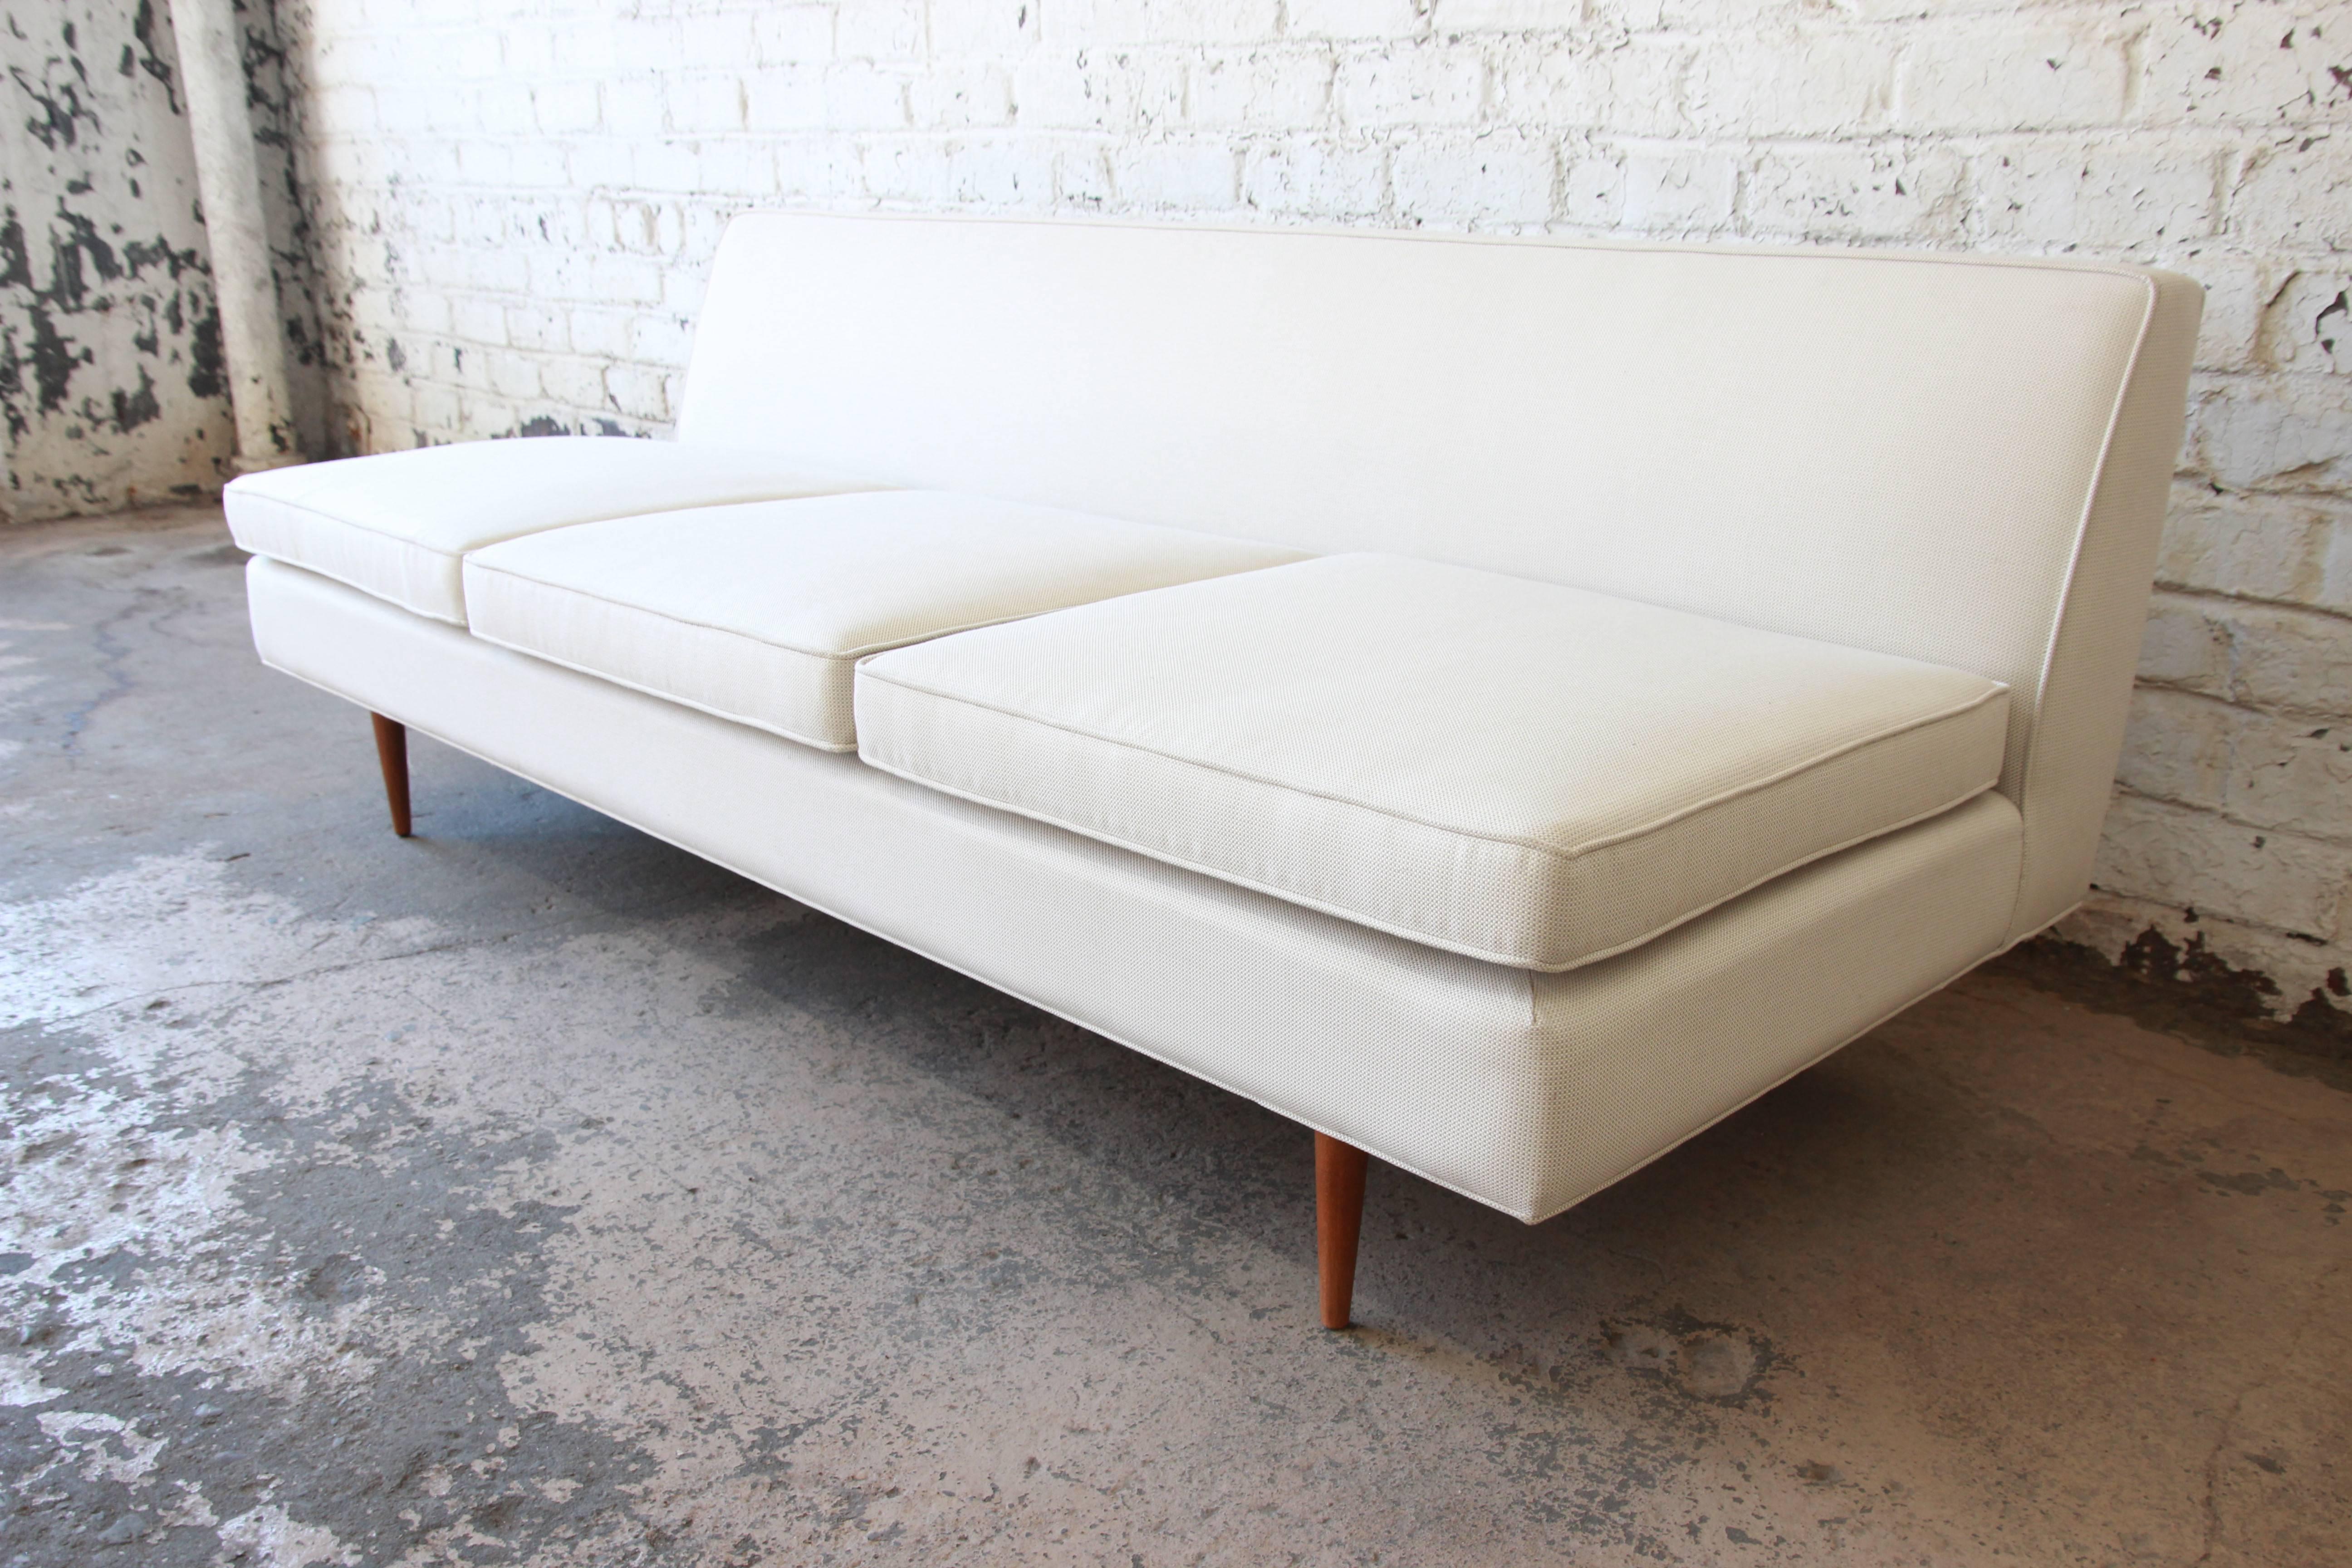 Offering an exceptional Mid-Century Modern armless sofa designed by Paul McCobb. The sofa features sleek mid-century design and thin tapered solid walnut legs. It has been professionally restored with new springs, foam, and crosshatch Knoll